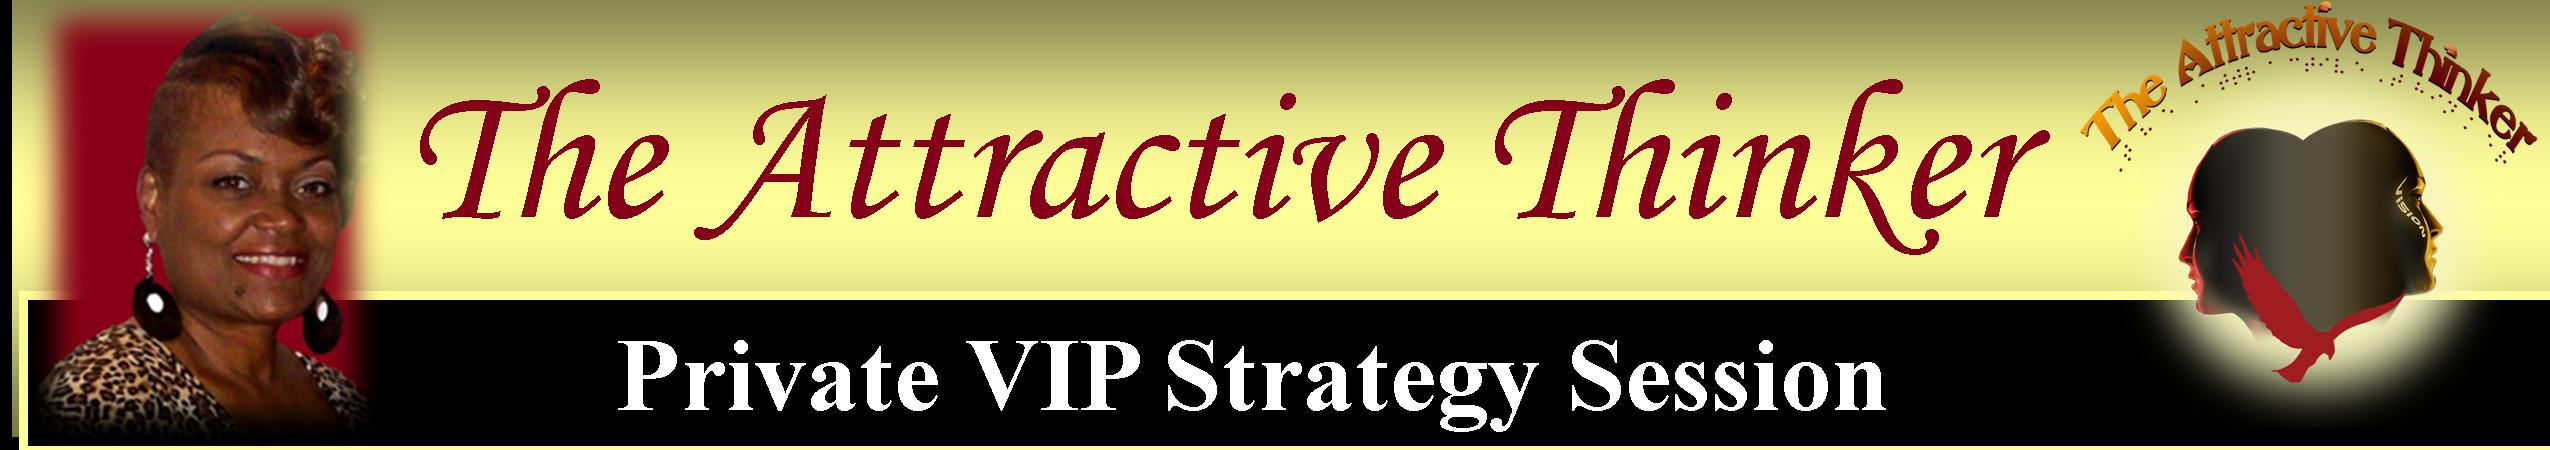 The Attractive Thinker Private VIP Strategy Session Program banner